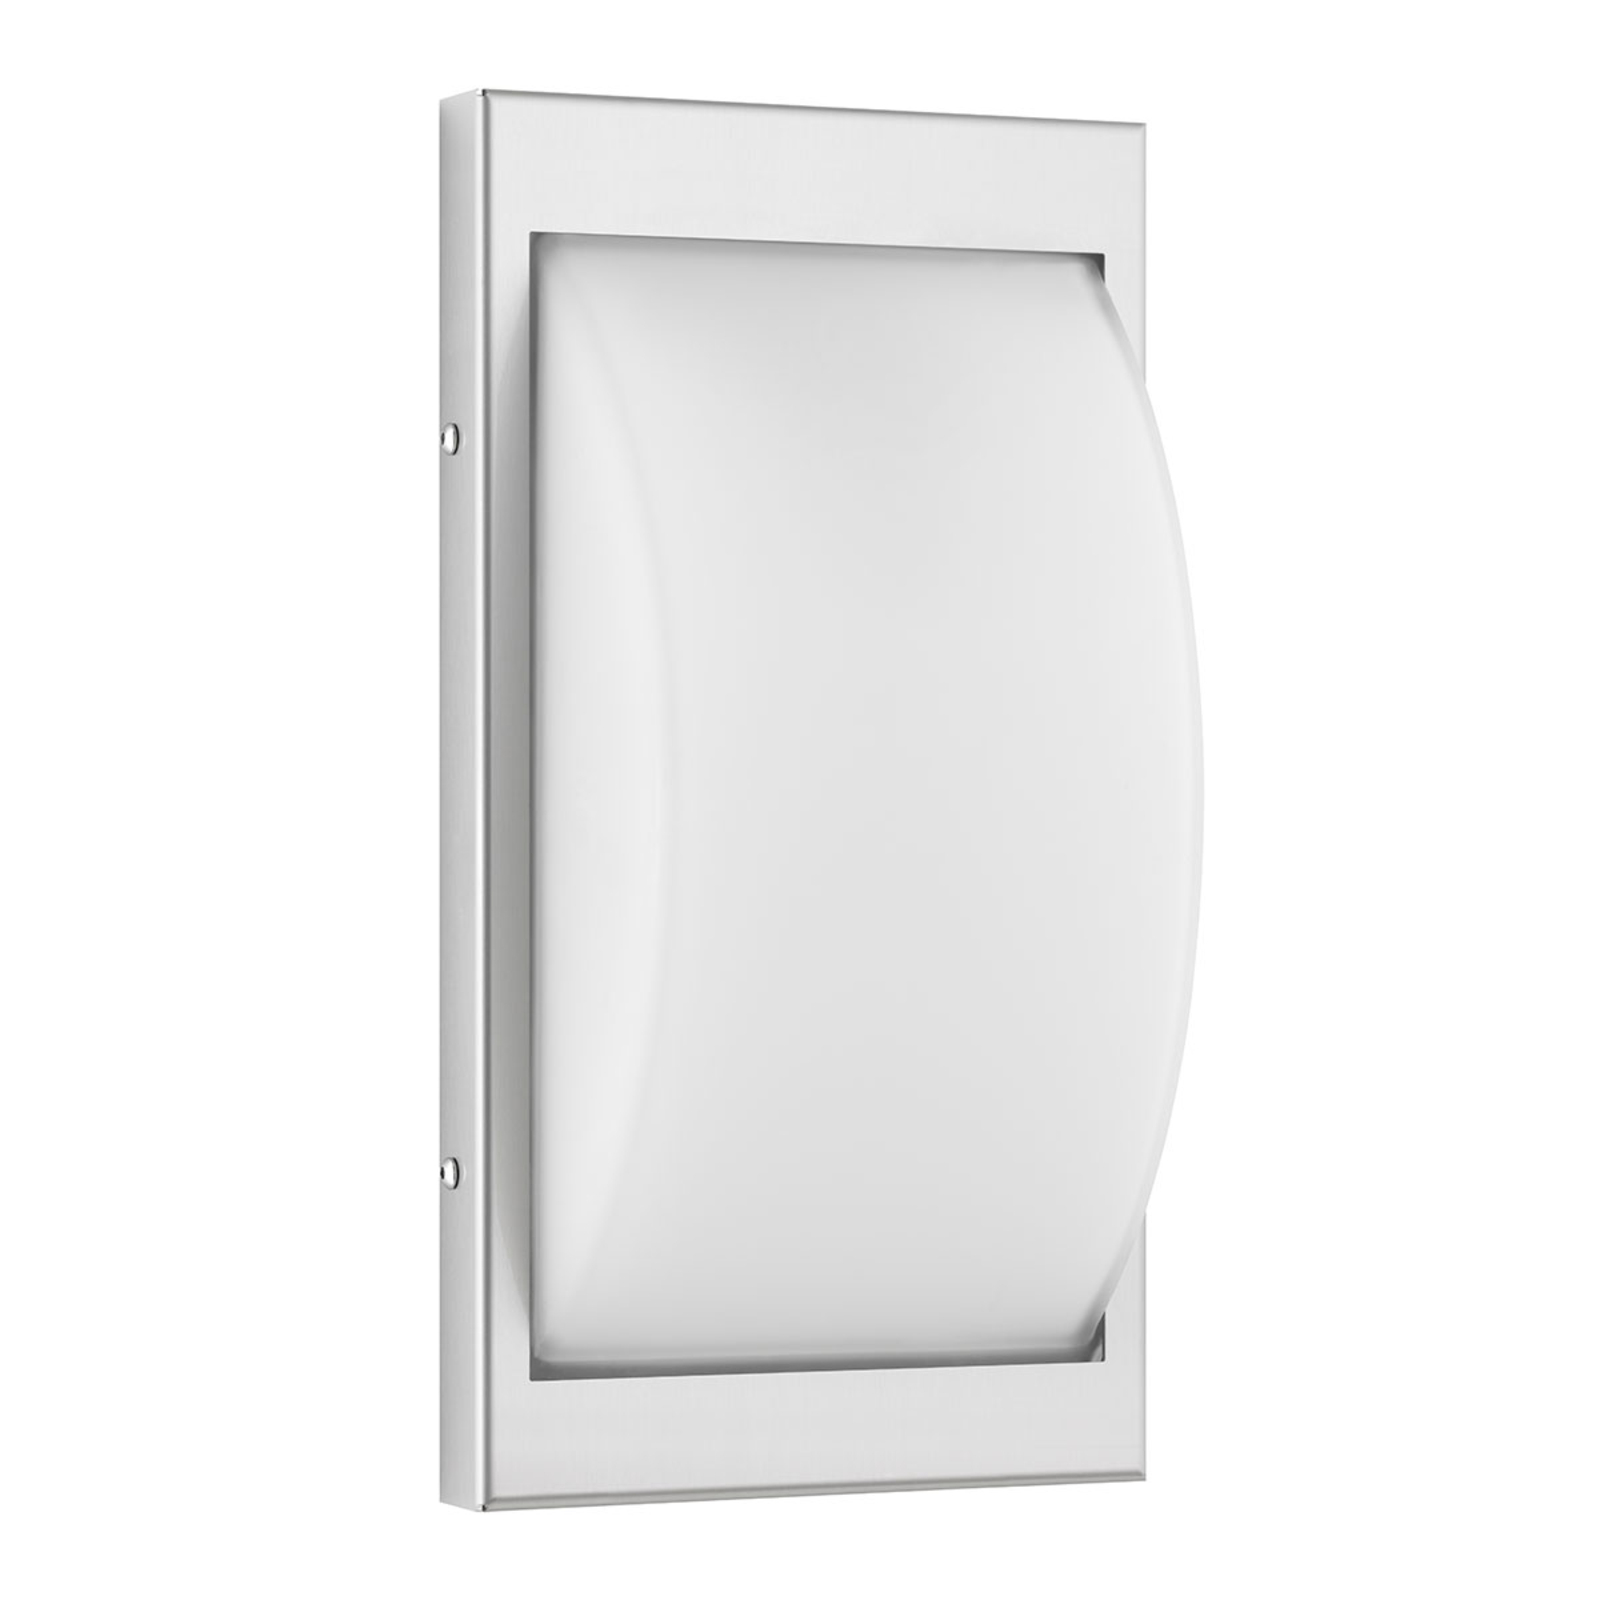 068 outdoor wall light E27 stainless steel